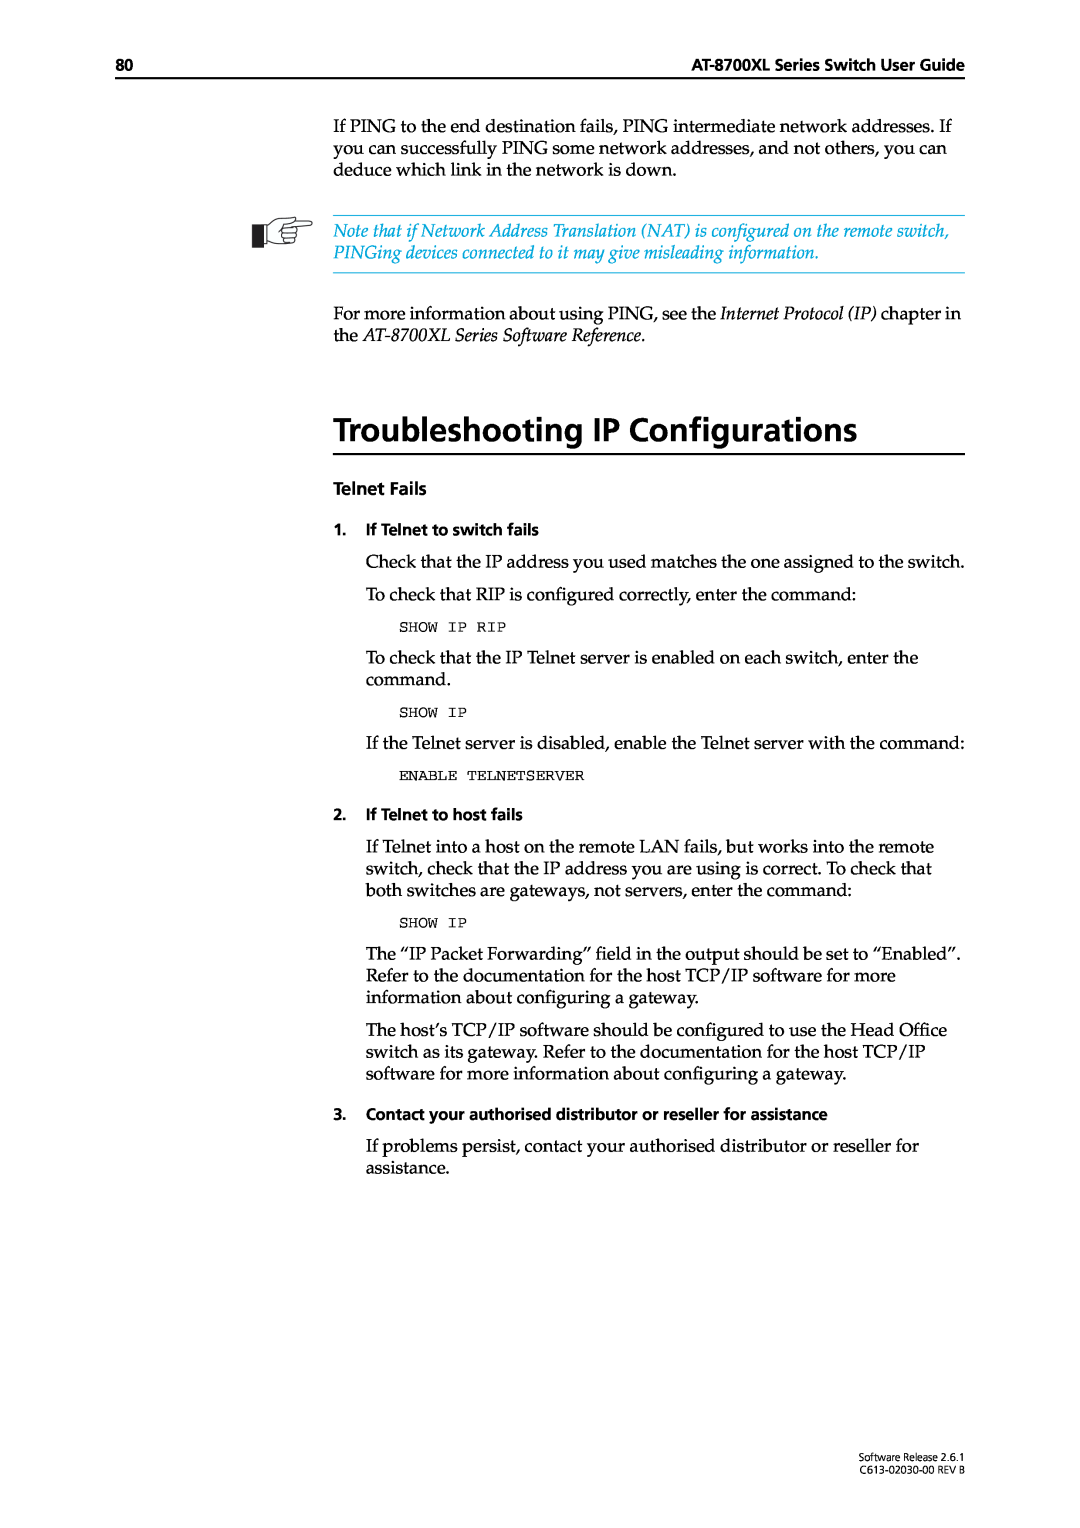 Allied Telesis at-8700xl series switch manual Troubleshooting IP Configurations, Telnet Fails 